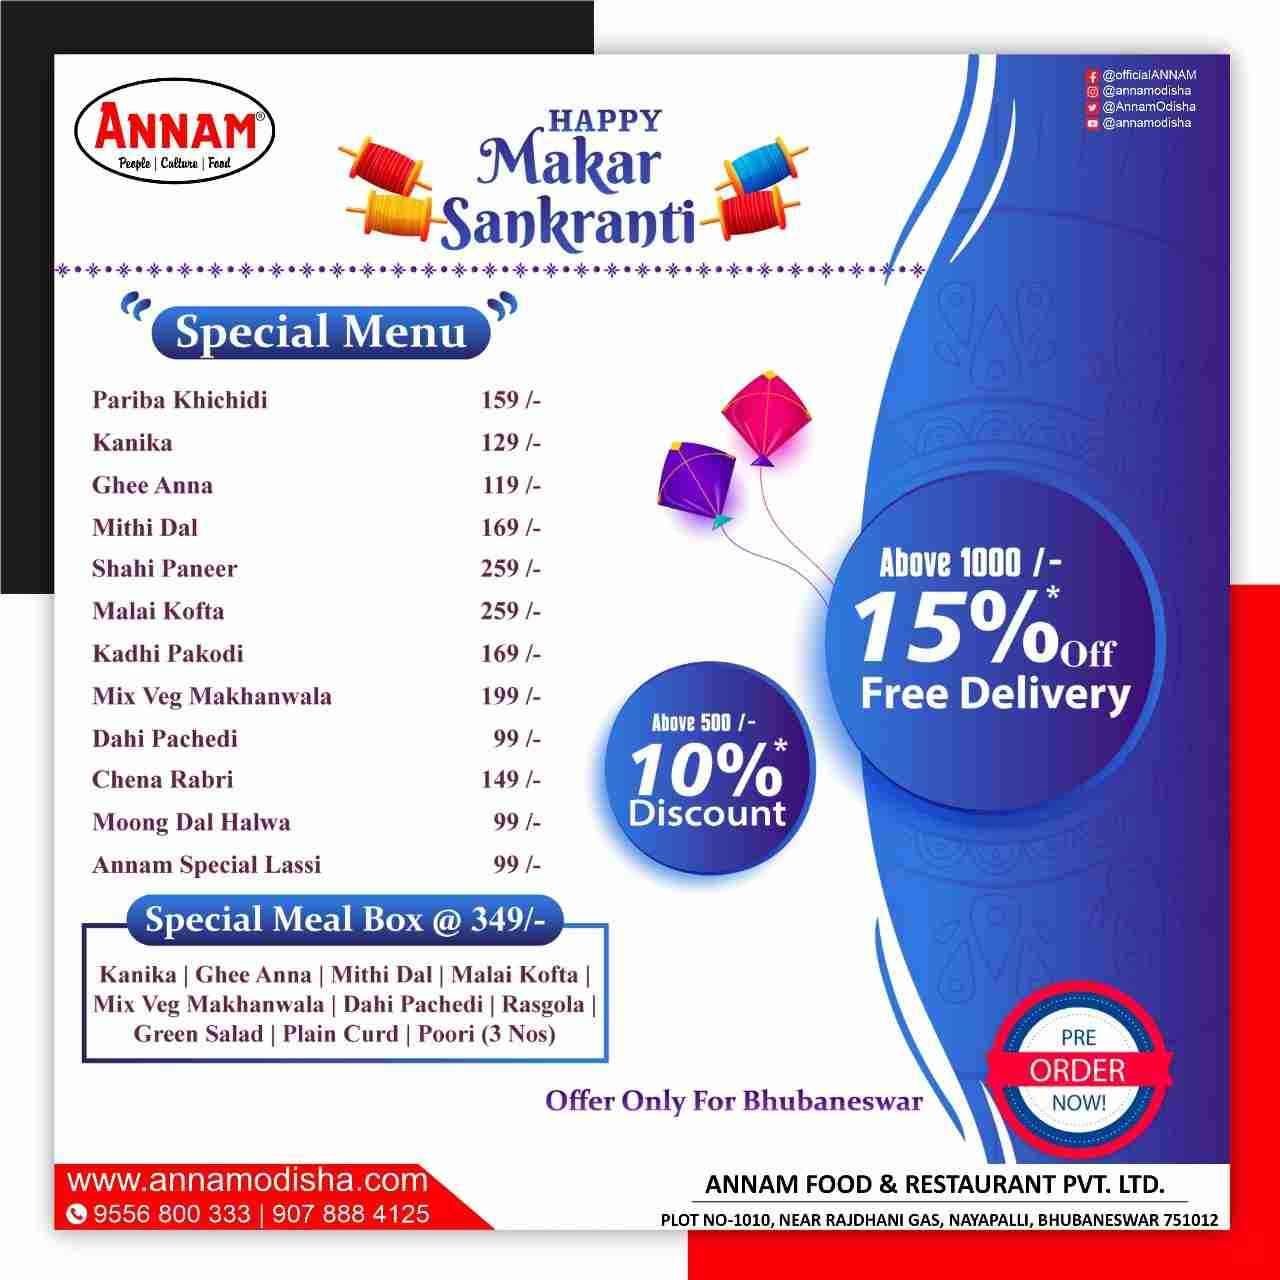 Preorder Makara Sankranti Special Meal Box From Annam With Special Discount